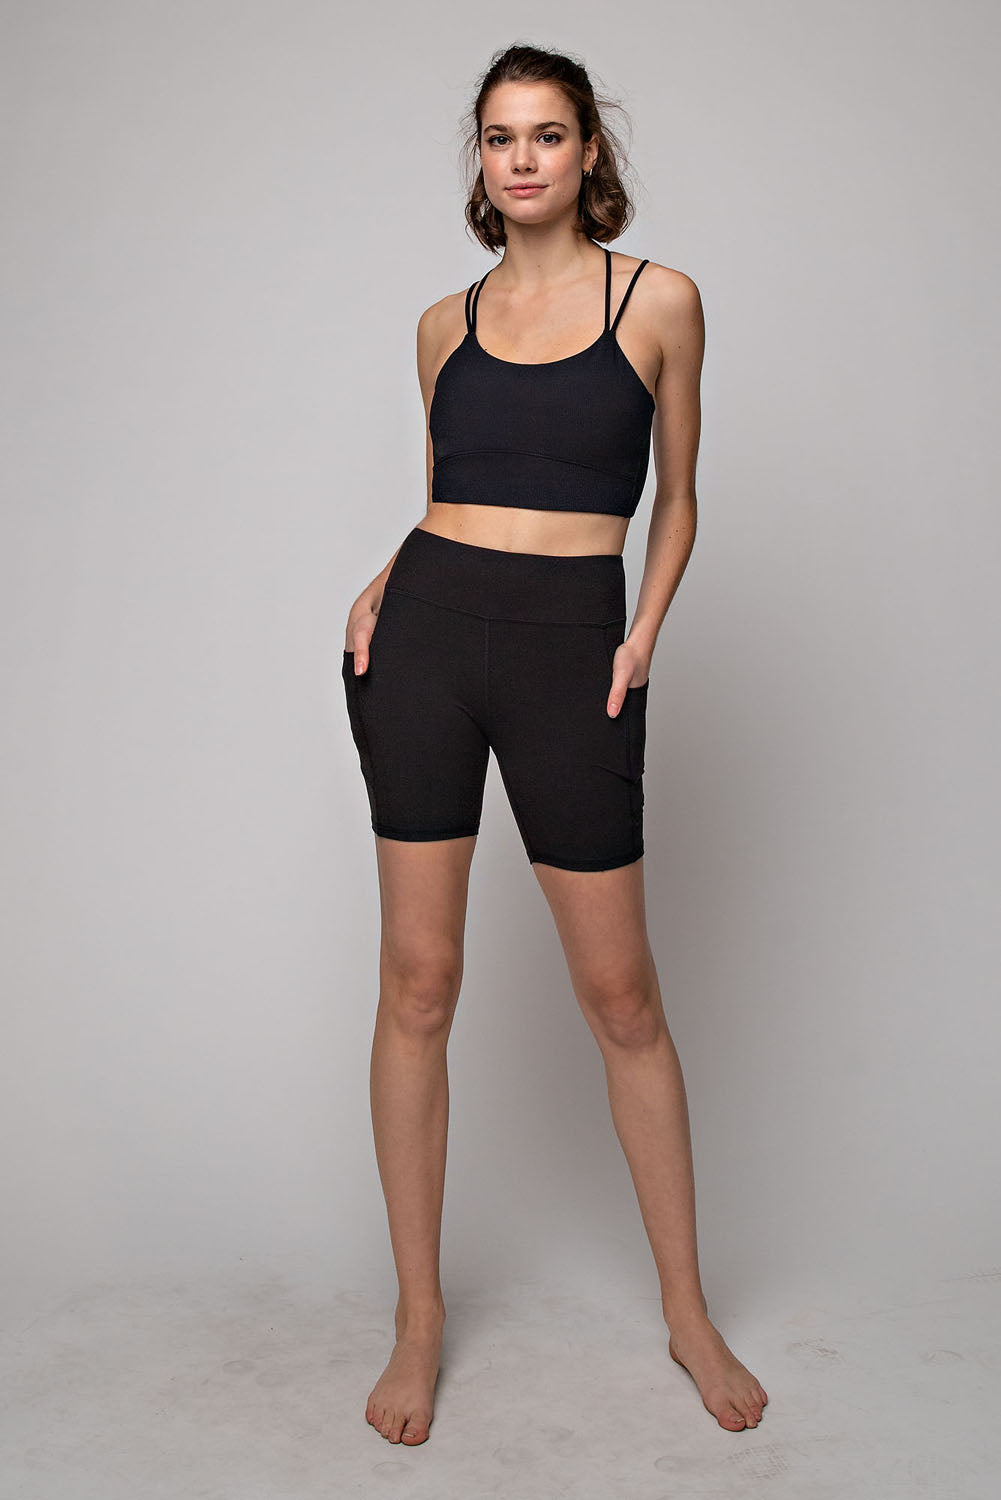 The Rae Basic Biker Shorts - Discontinued Colors